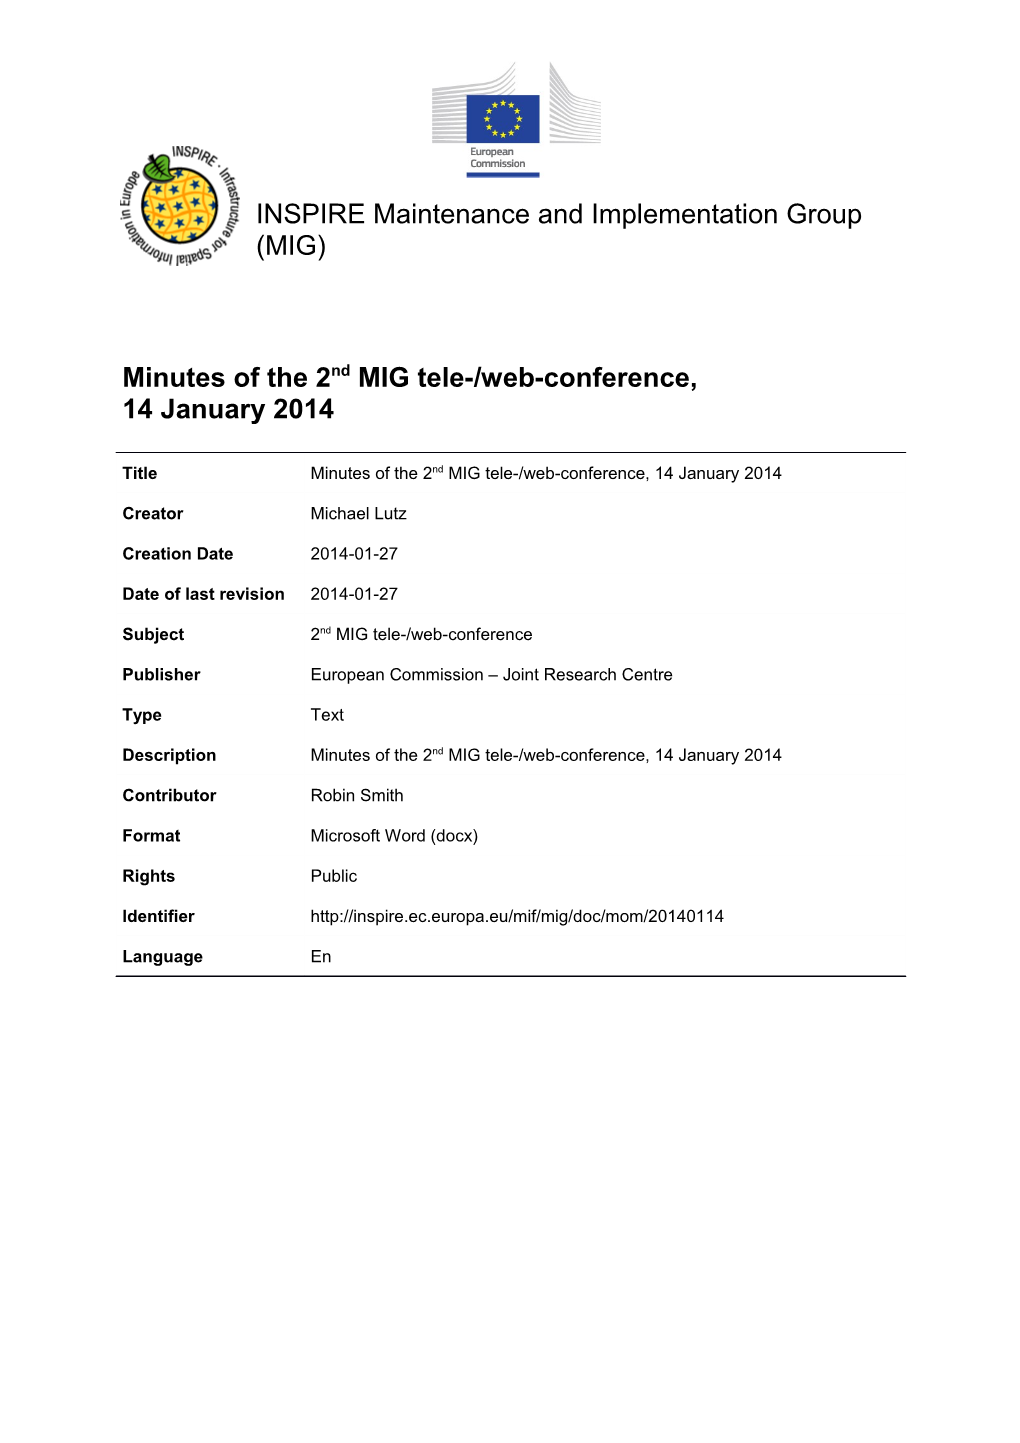 Minutes of 2Nd MIG Tele-/Web-Conference, 14/01/2014